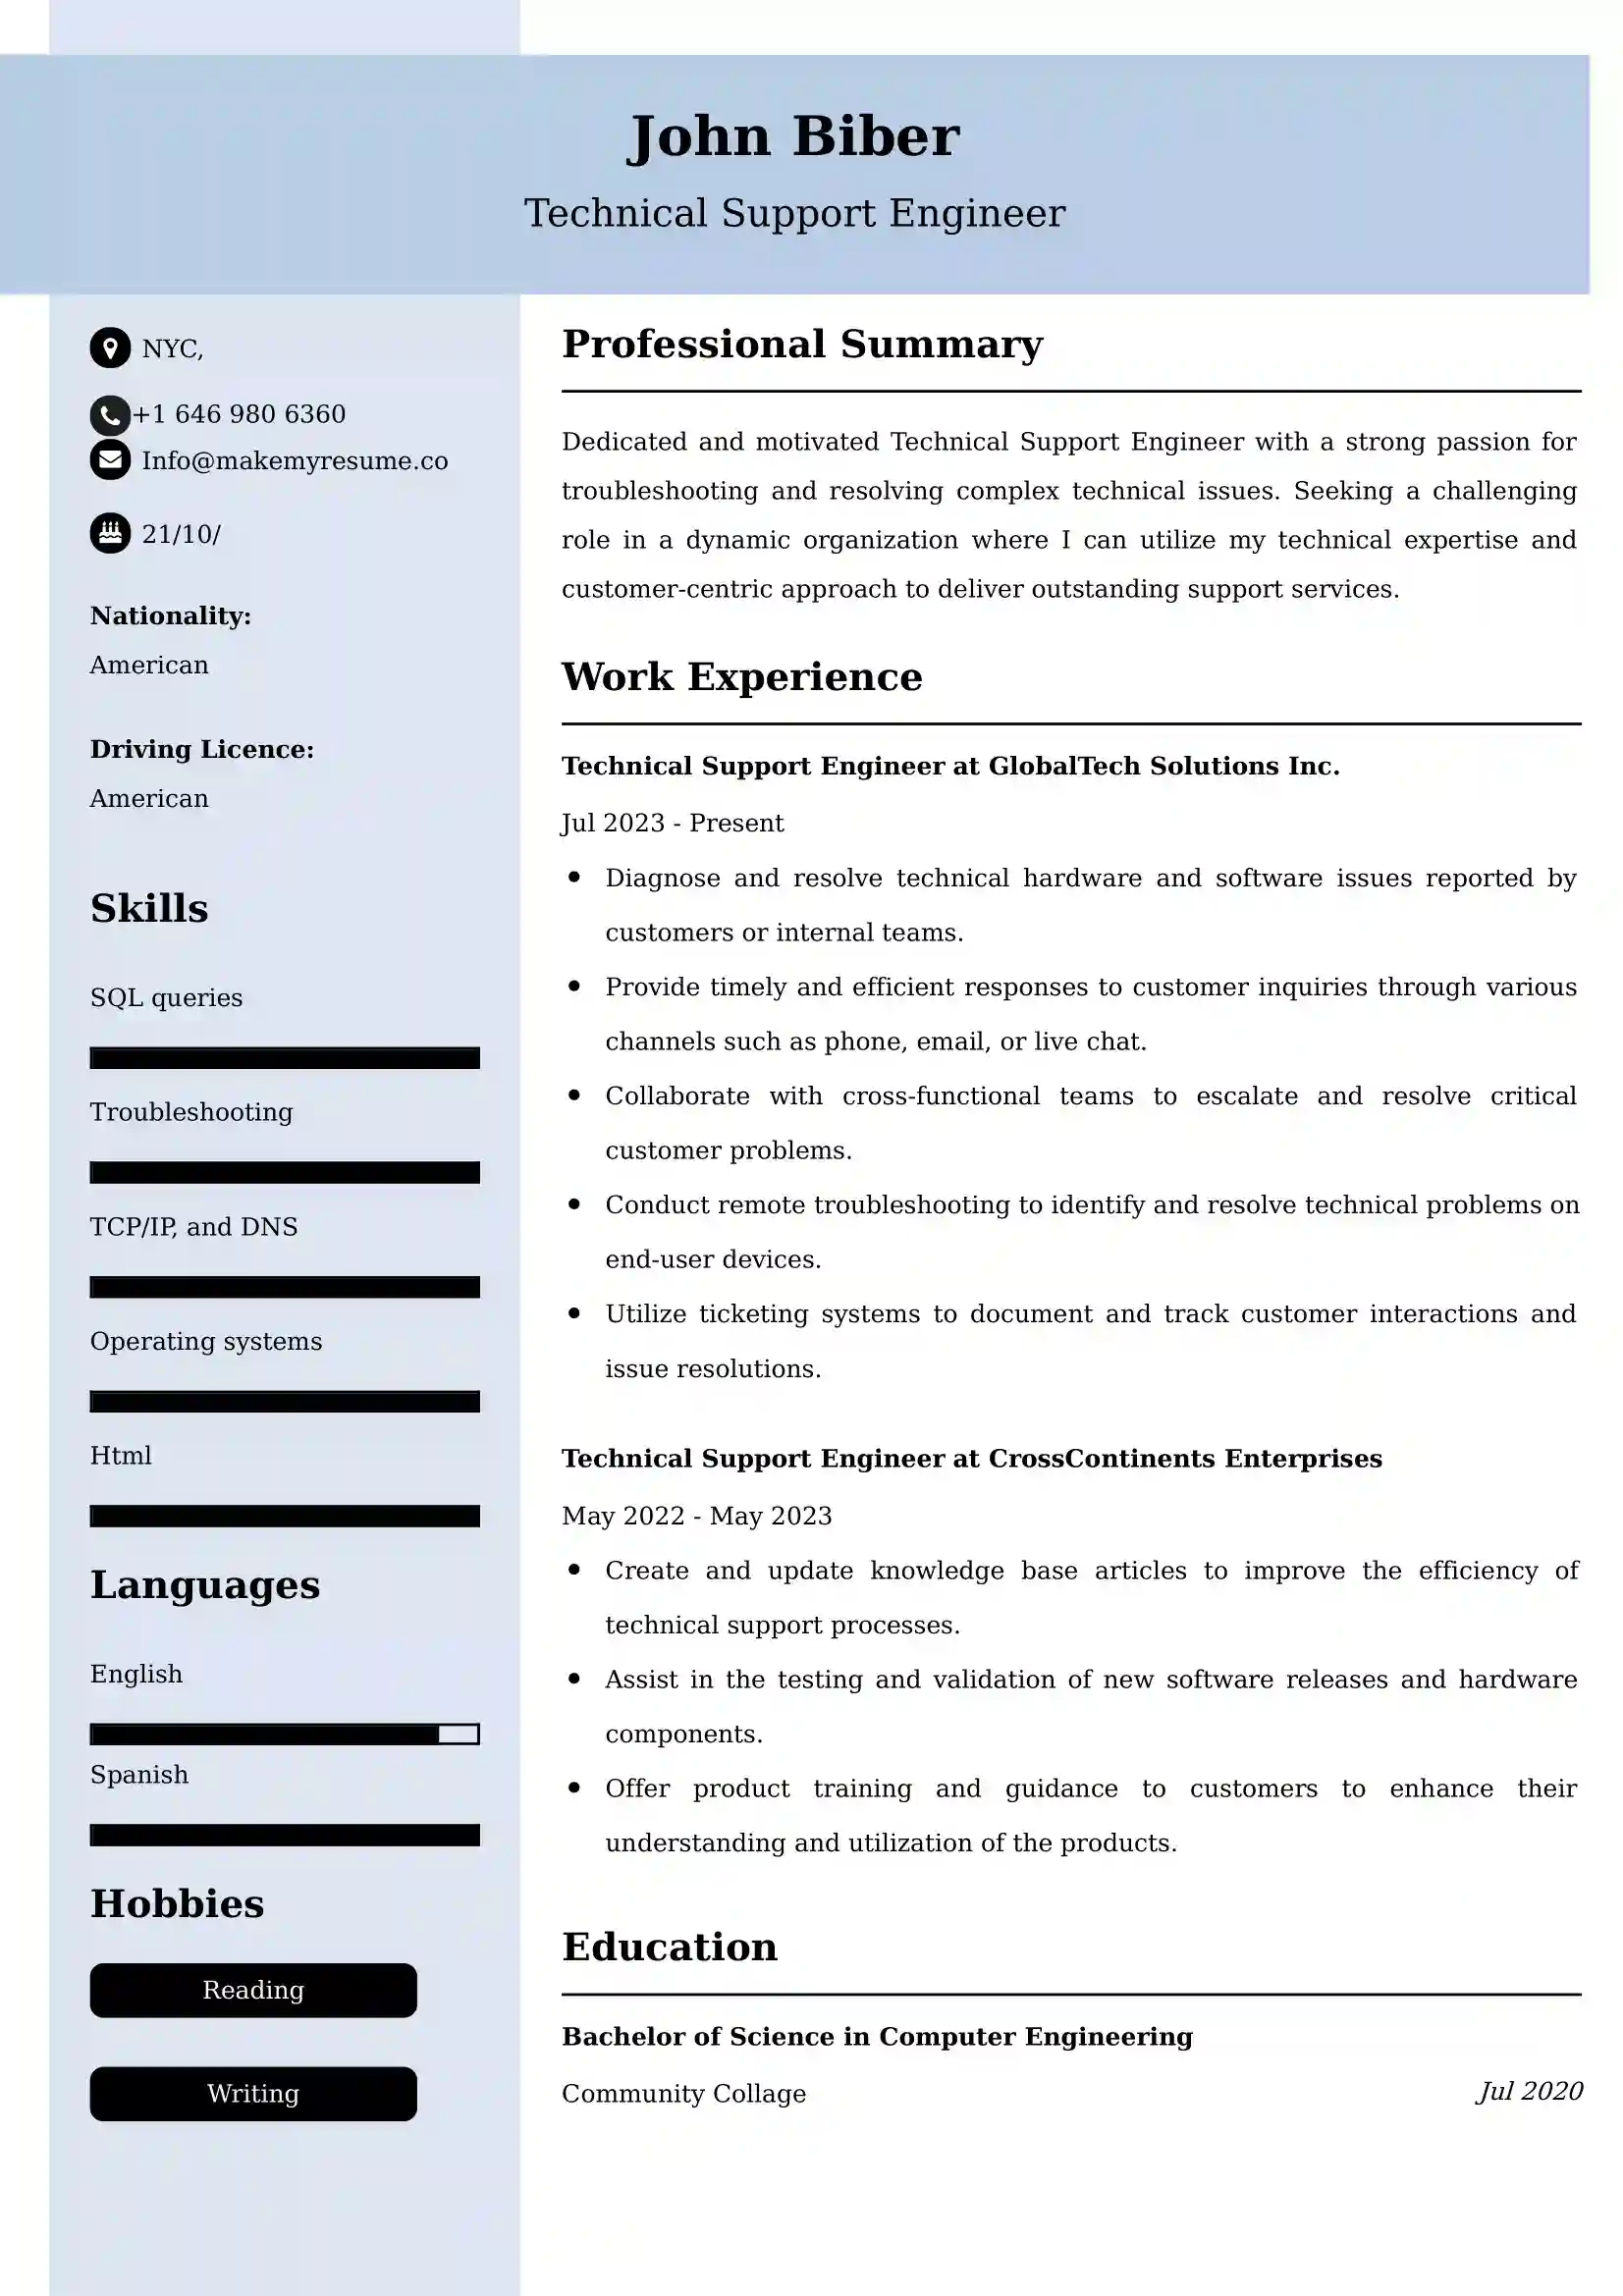 Technical Support Engineer Resume Examples for UK Jobs - Tips and Guide